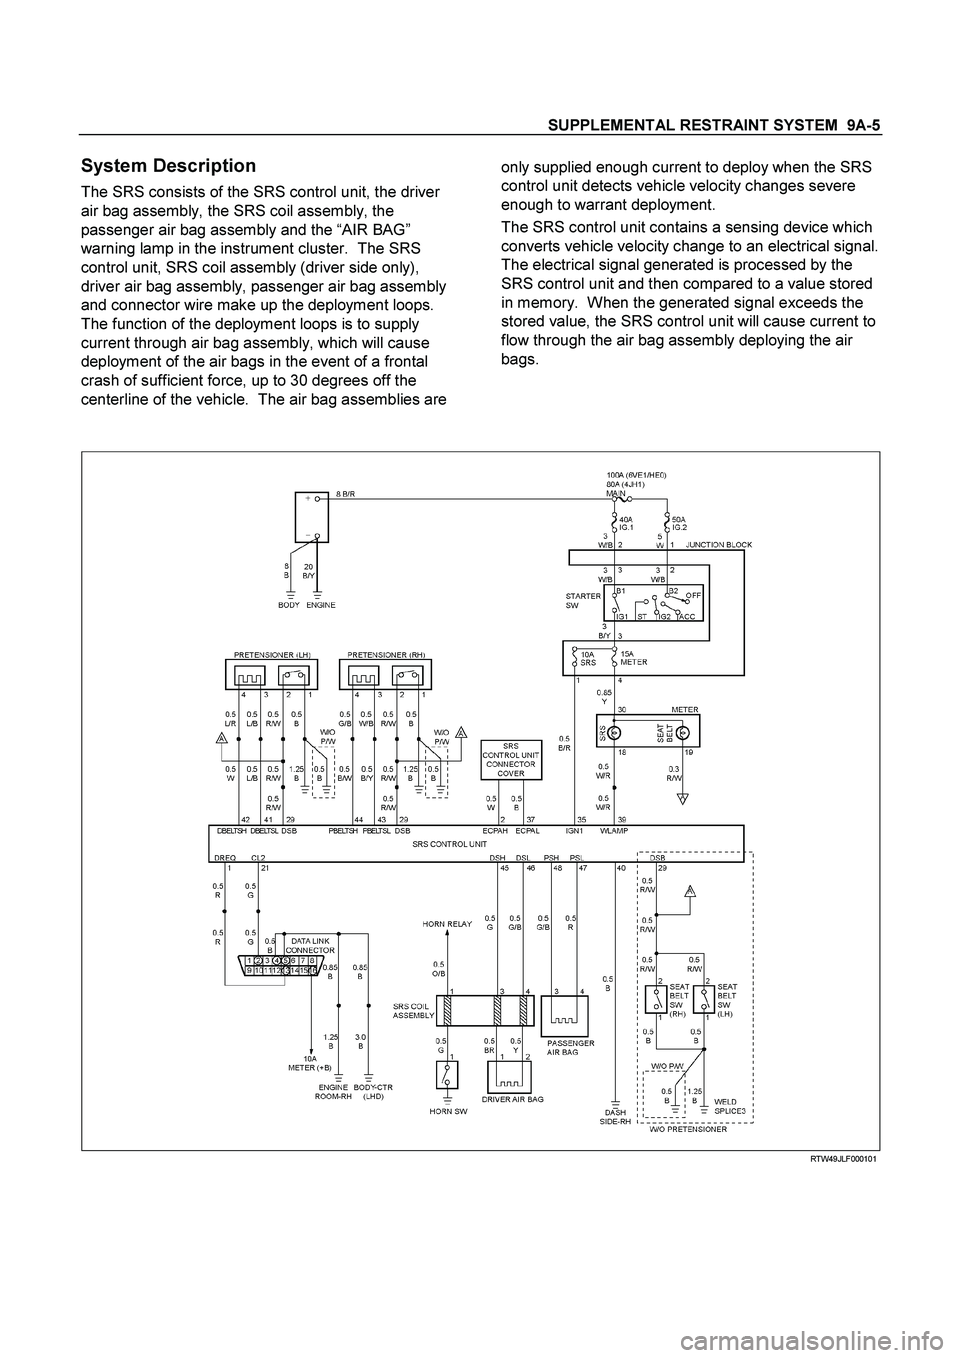 ISUZU TF SERIES 2004  Workshop Manual SUPPLEMENTAL RESTRAINT SYSTEM  9A-5
 
System Description 
The SRS consists of the SRS control unit, the driver 
air bag assembly, the SRS coil assembly, the 
passenger air bag assembly and the “AIR 